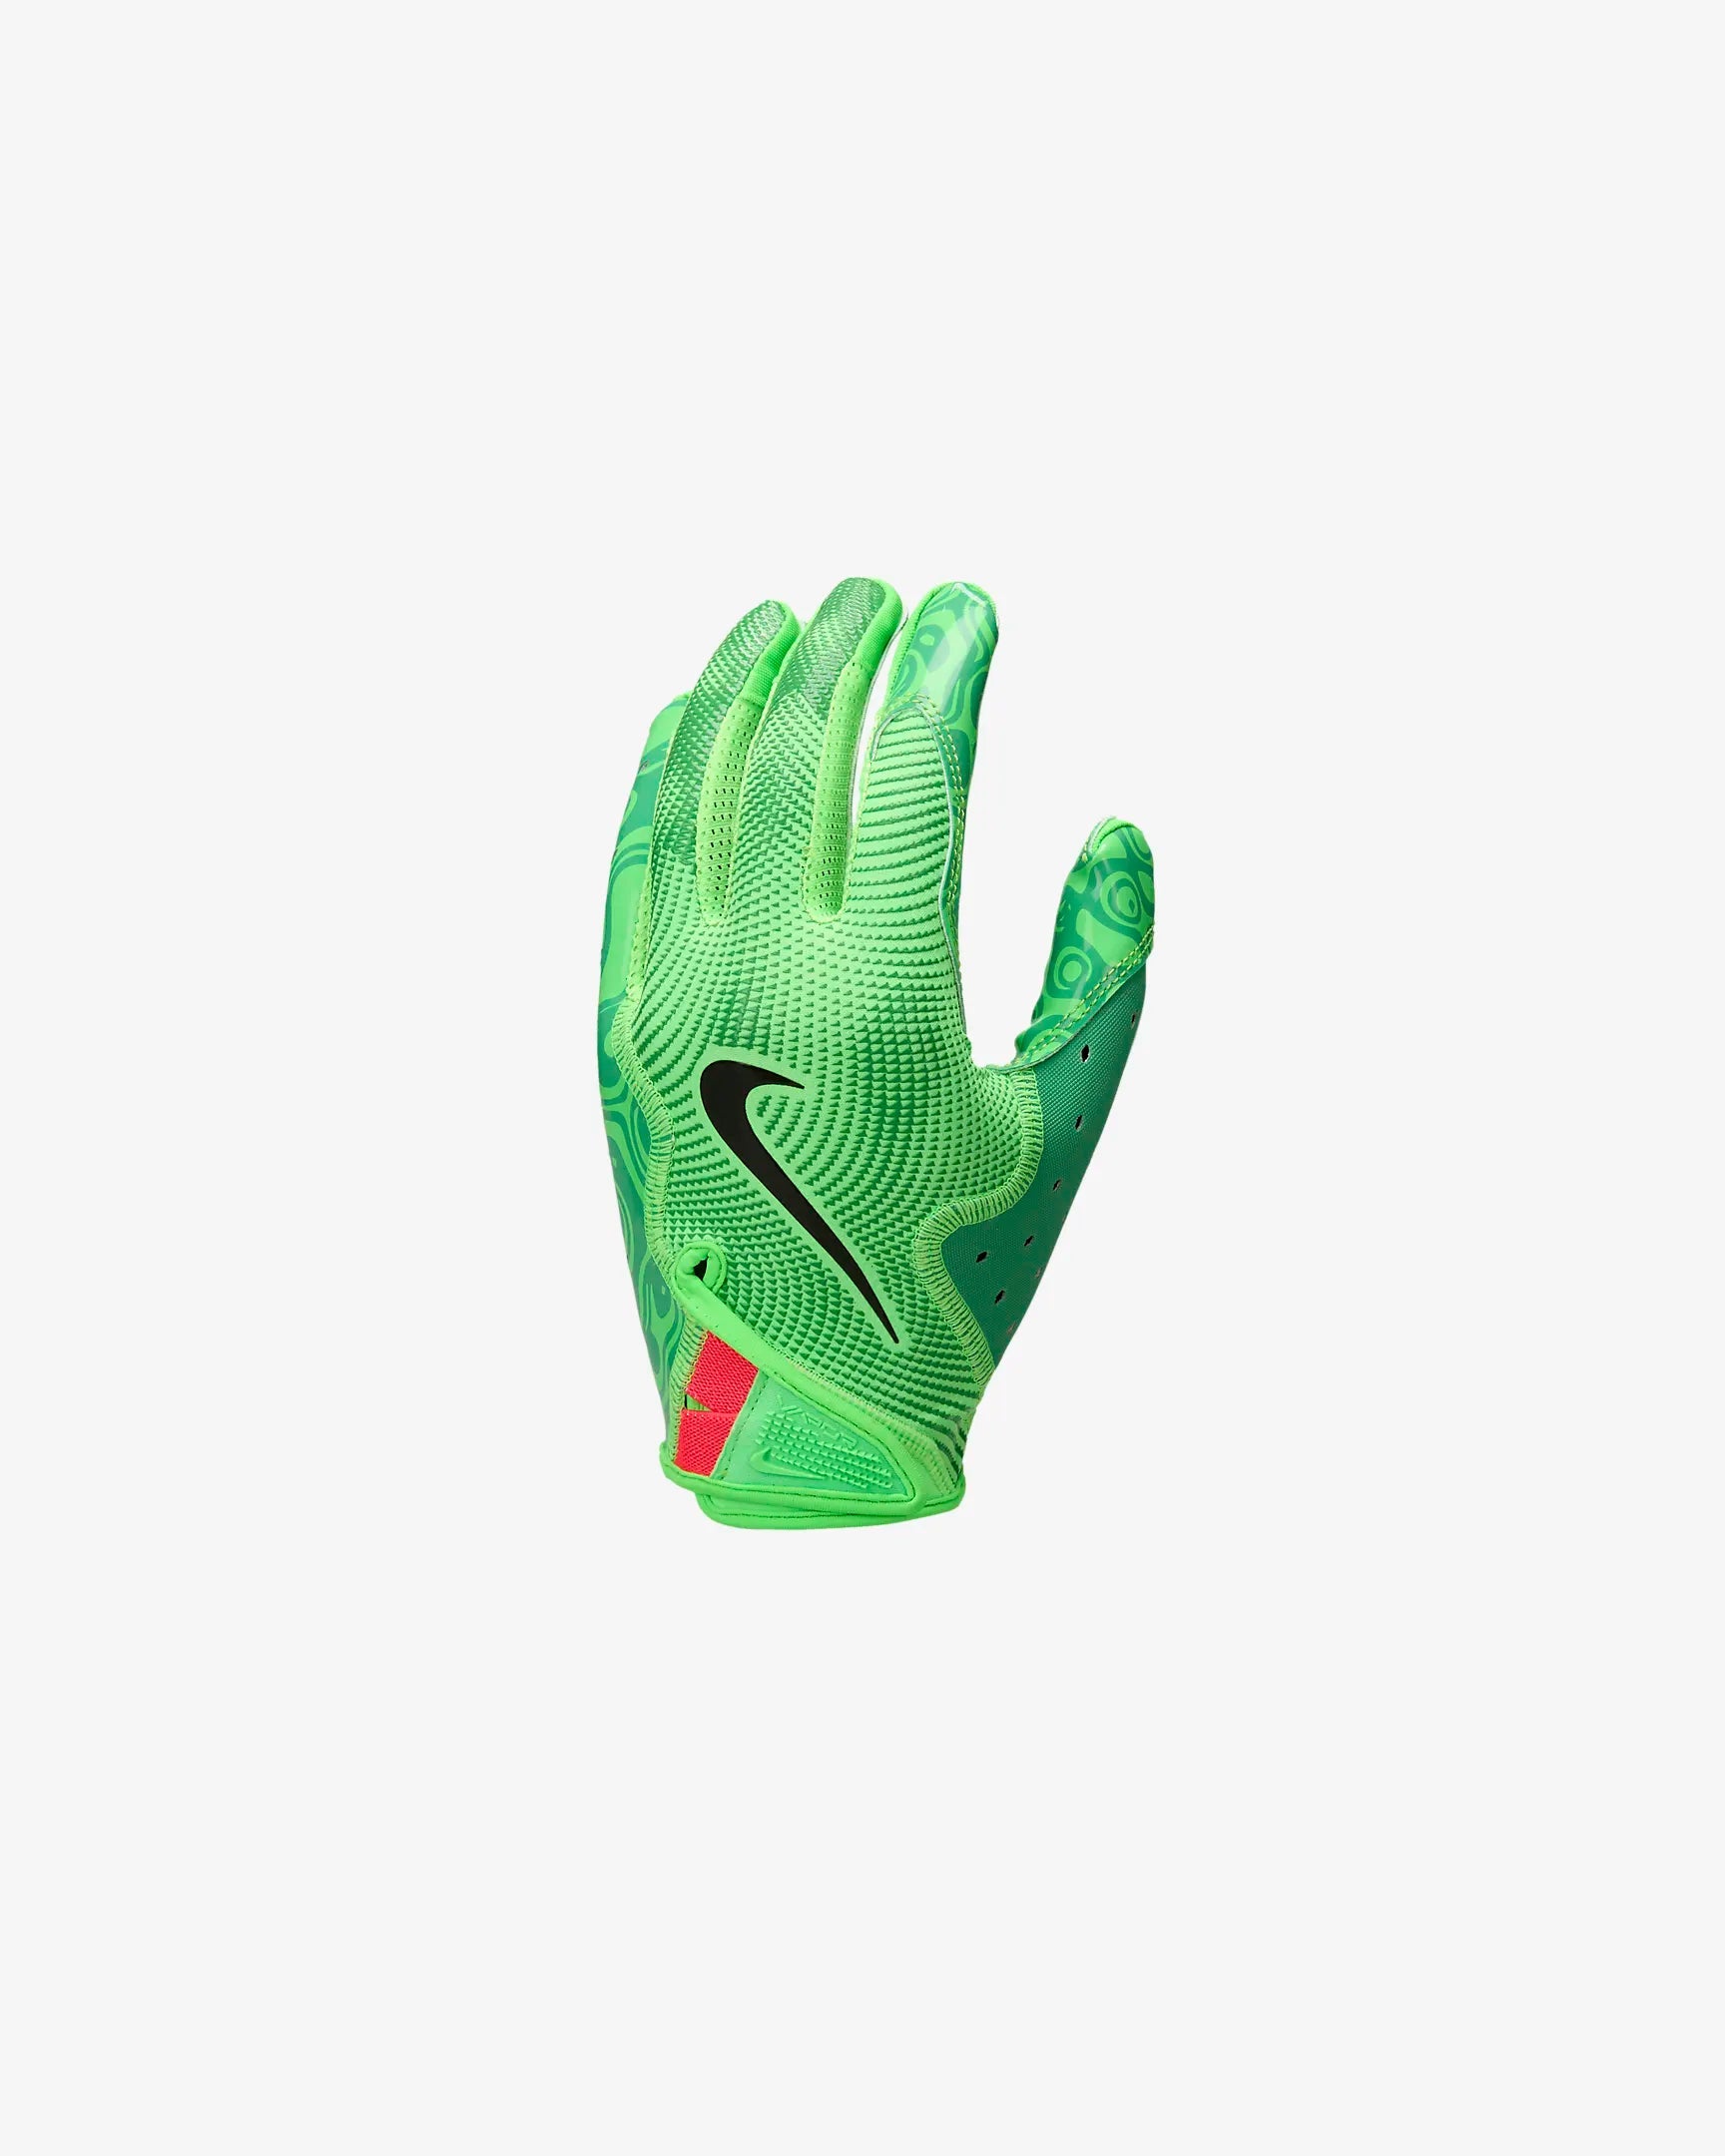 Nike Vapor Jet 8.0 Football Gloves-Nike-Sports Replay - Sports Excellence